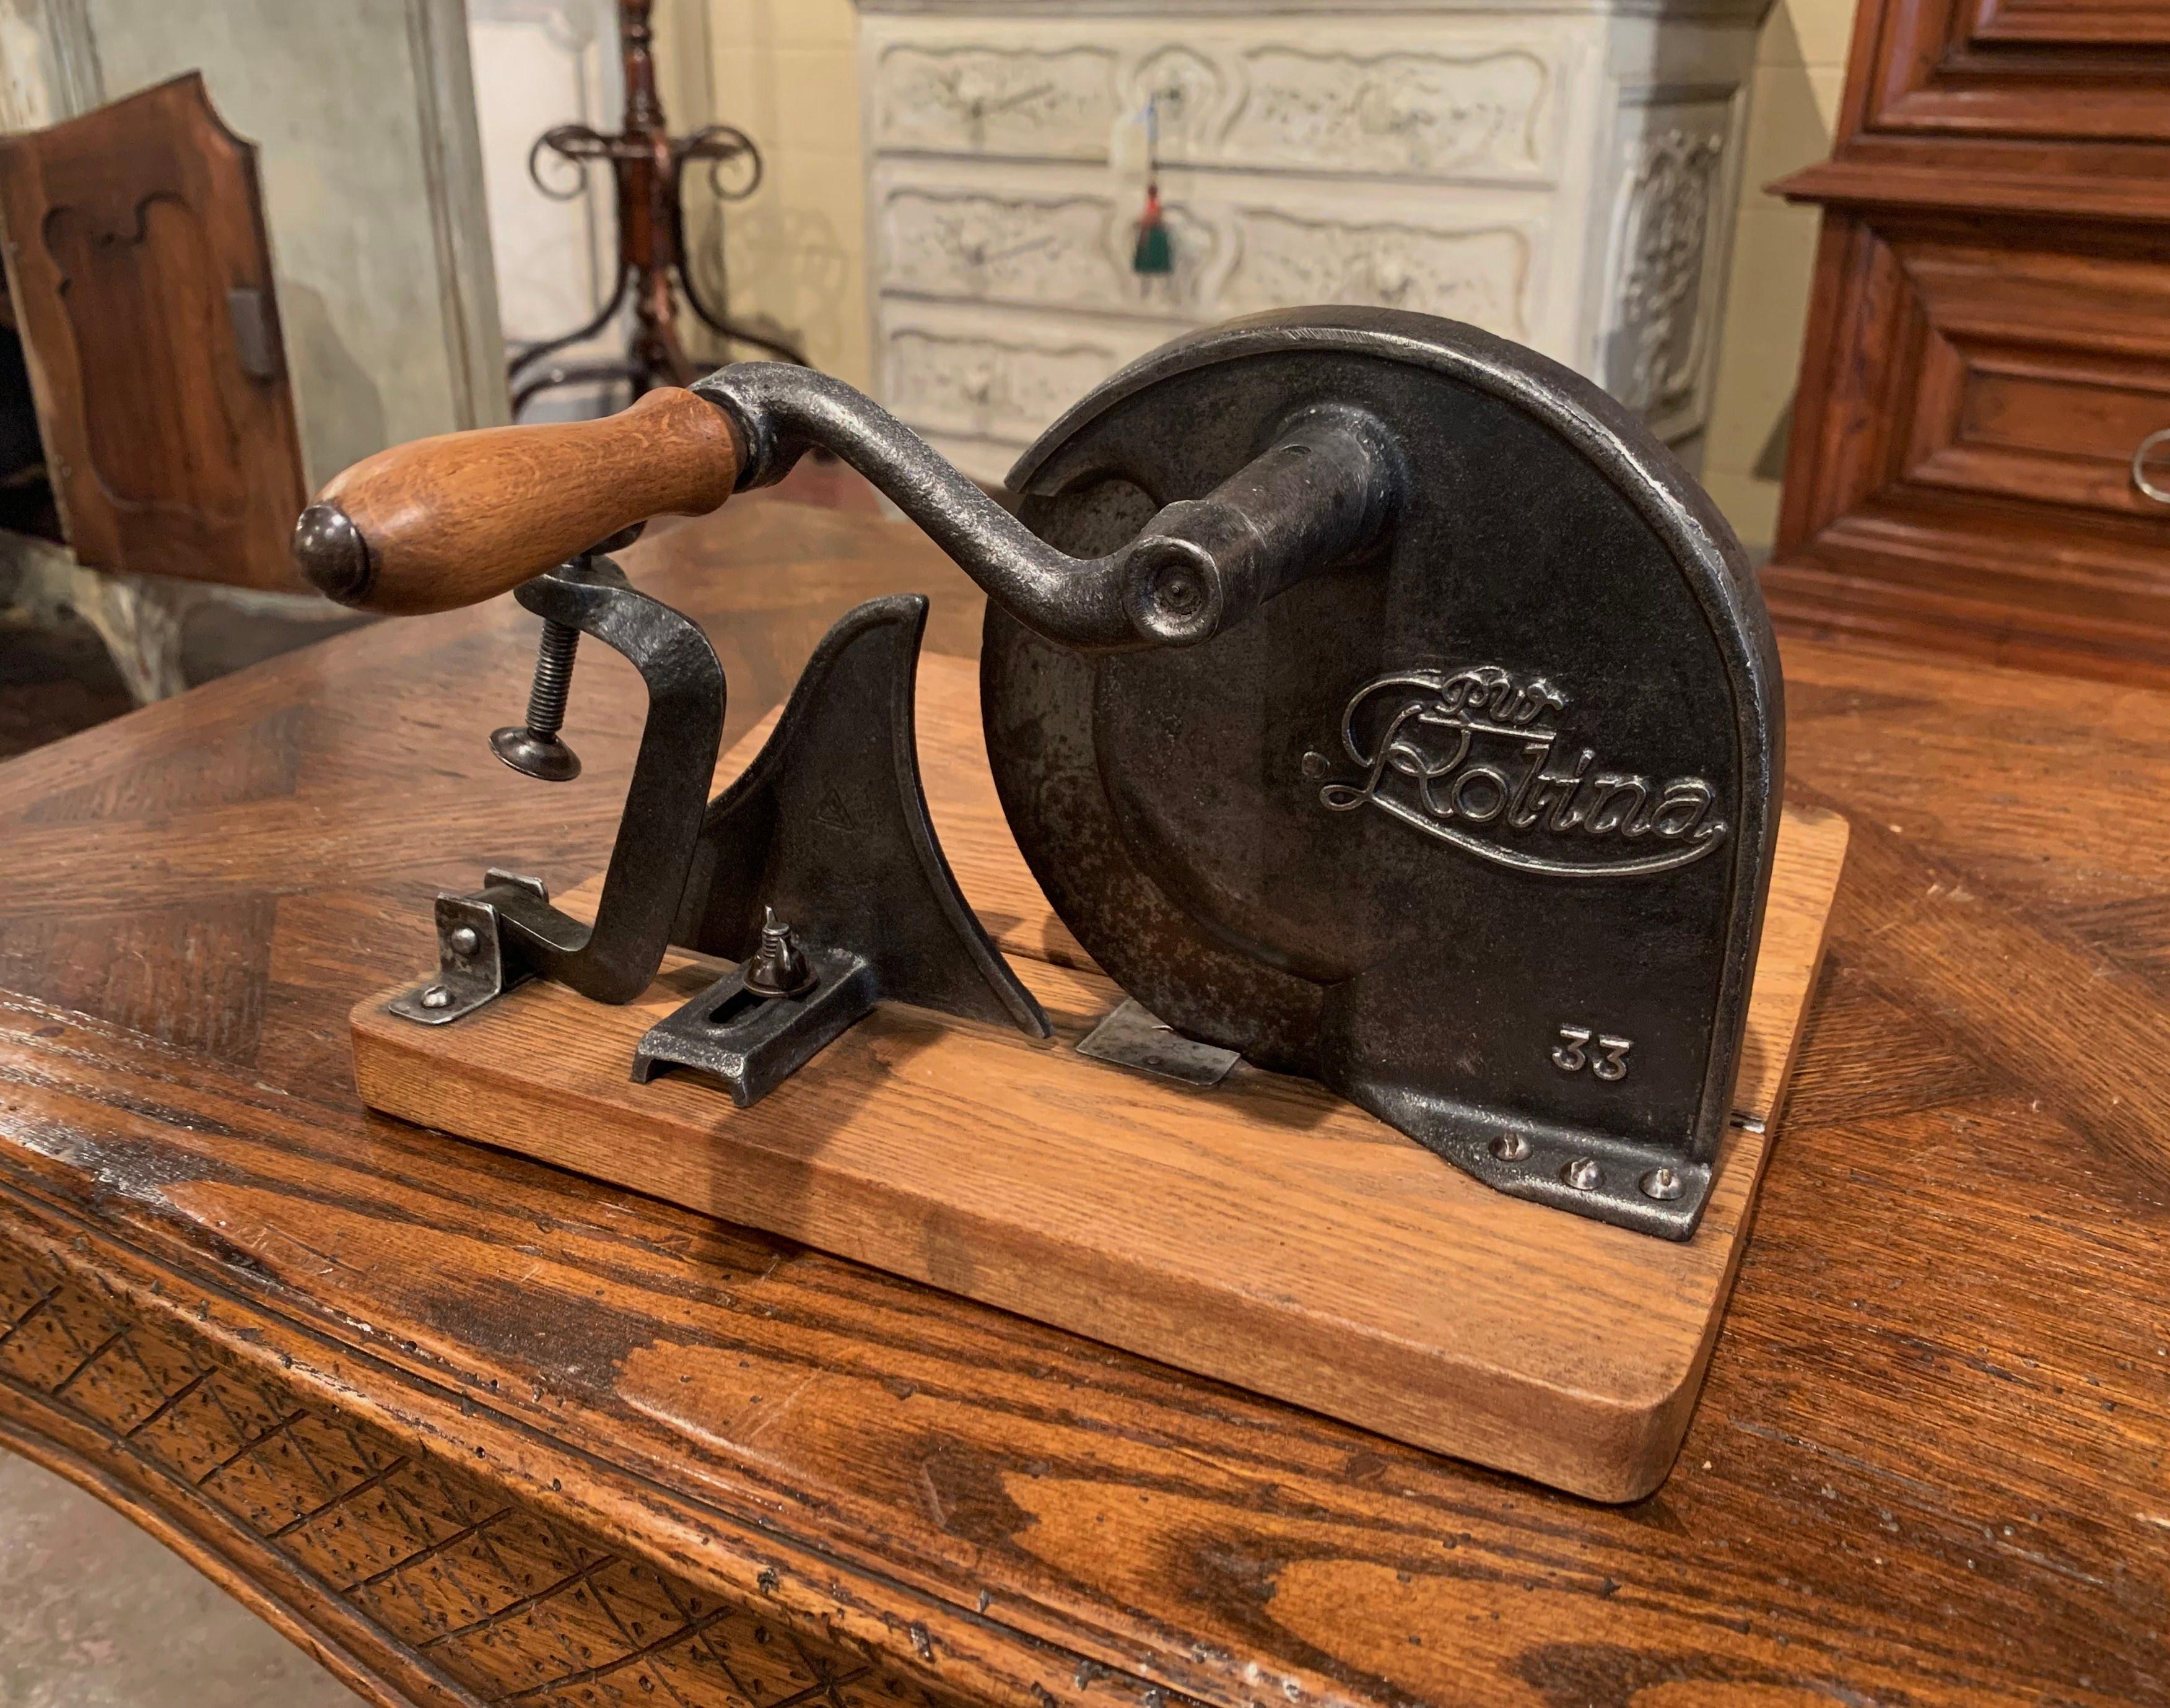 This vintage country slicer was crafted in Germany circa 1920, made of iron and wood, the cutter is mounted on a cutting board, it features an adjustable cutting wheel held with a wooden crank handle and a folding tray. The slicing devise is in